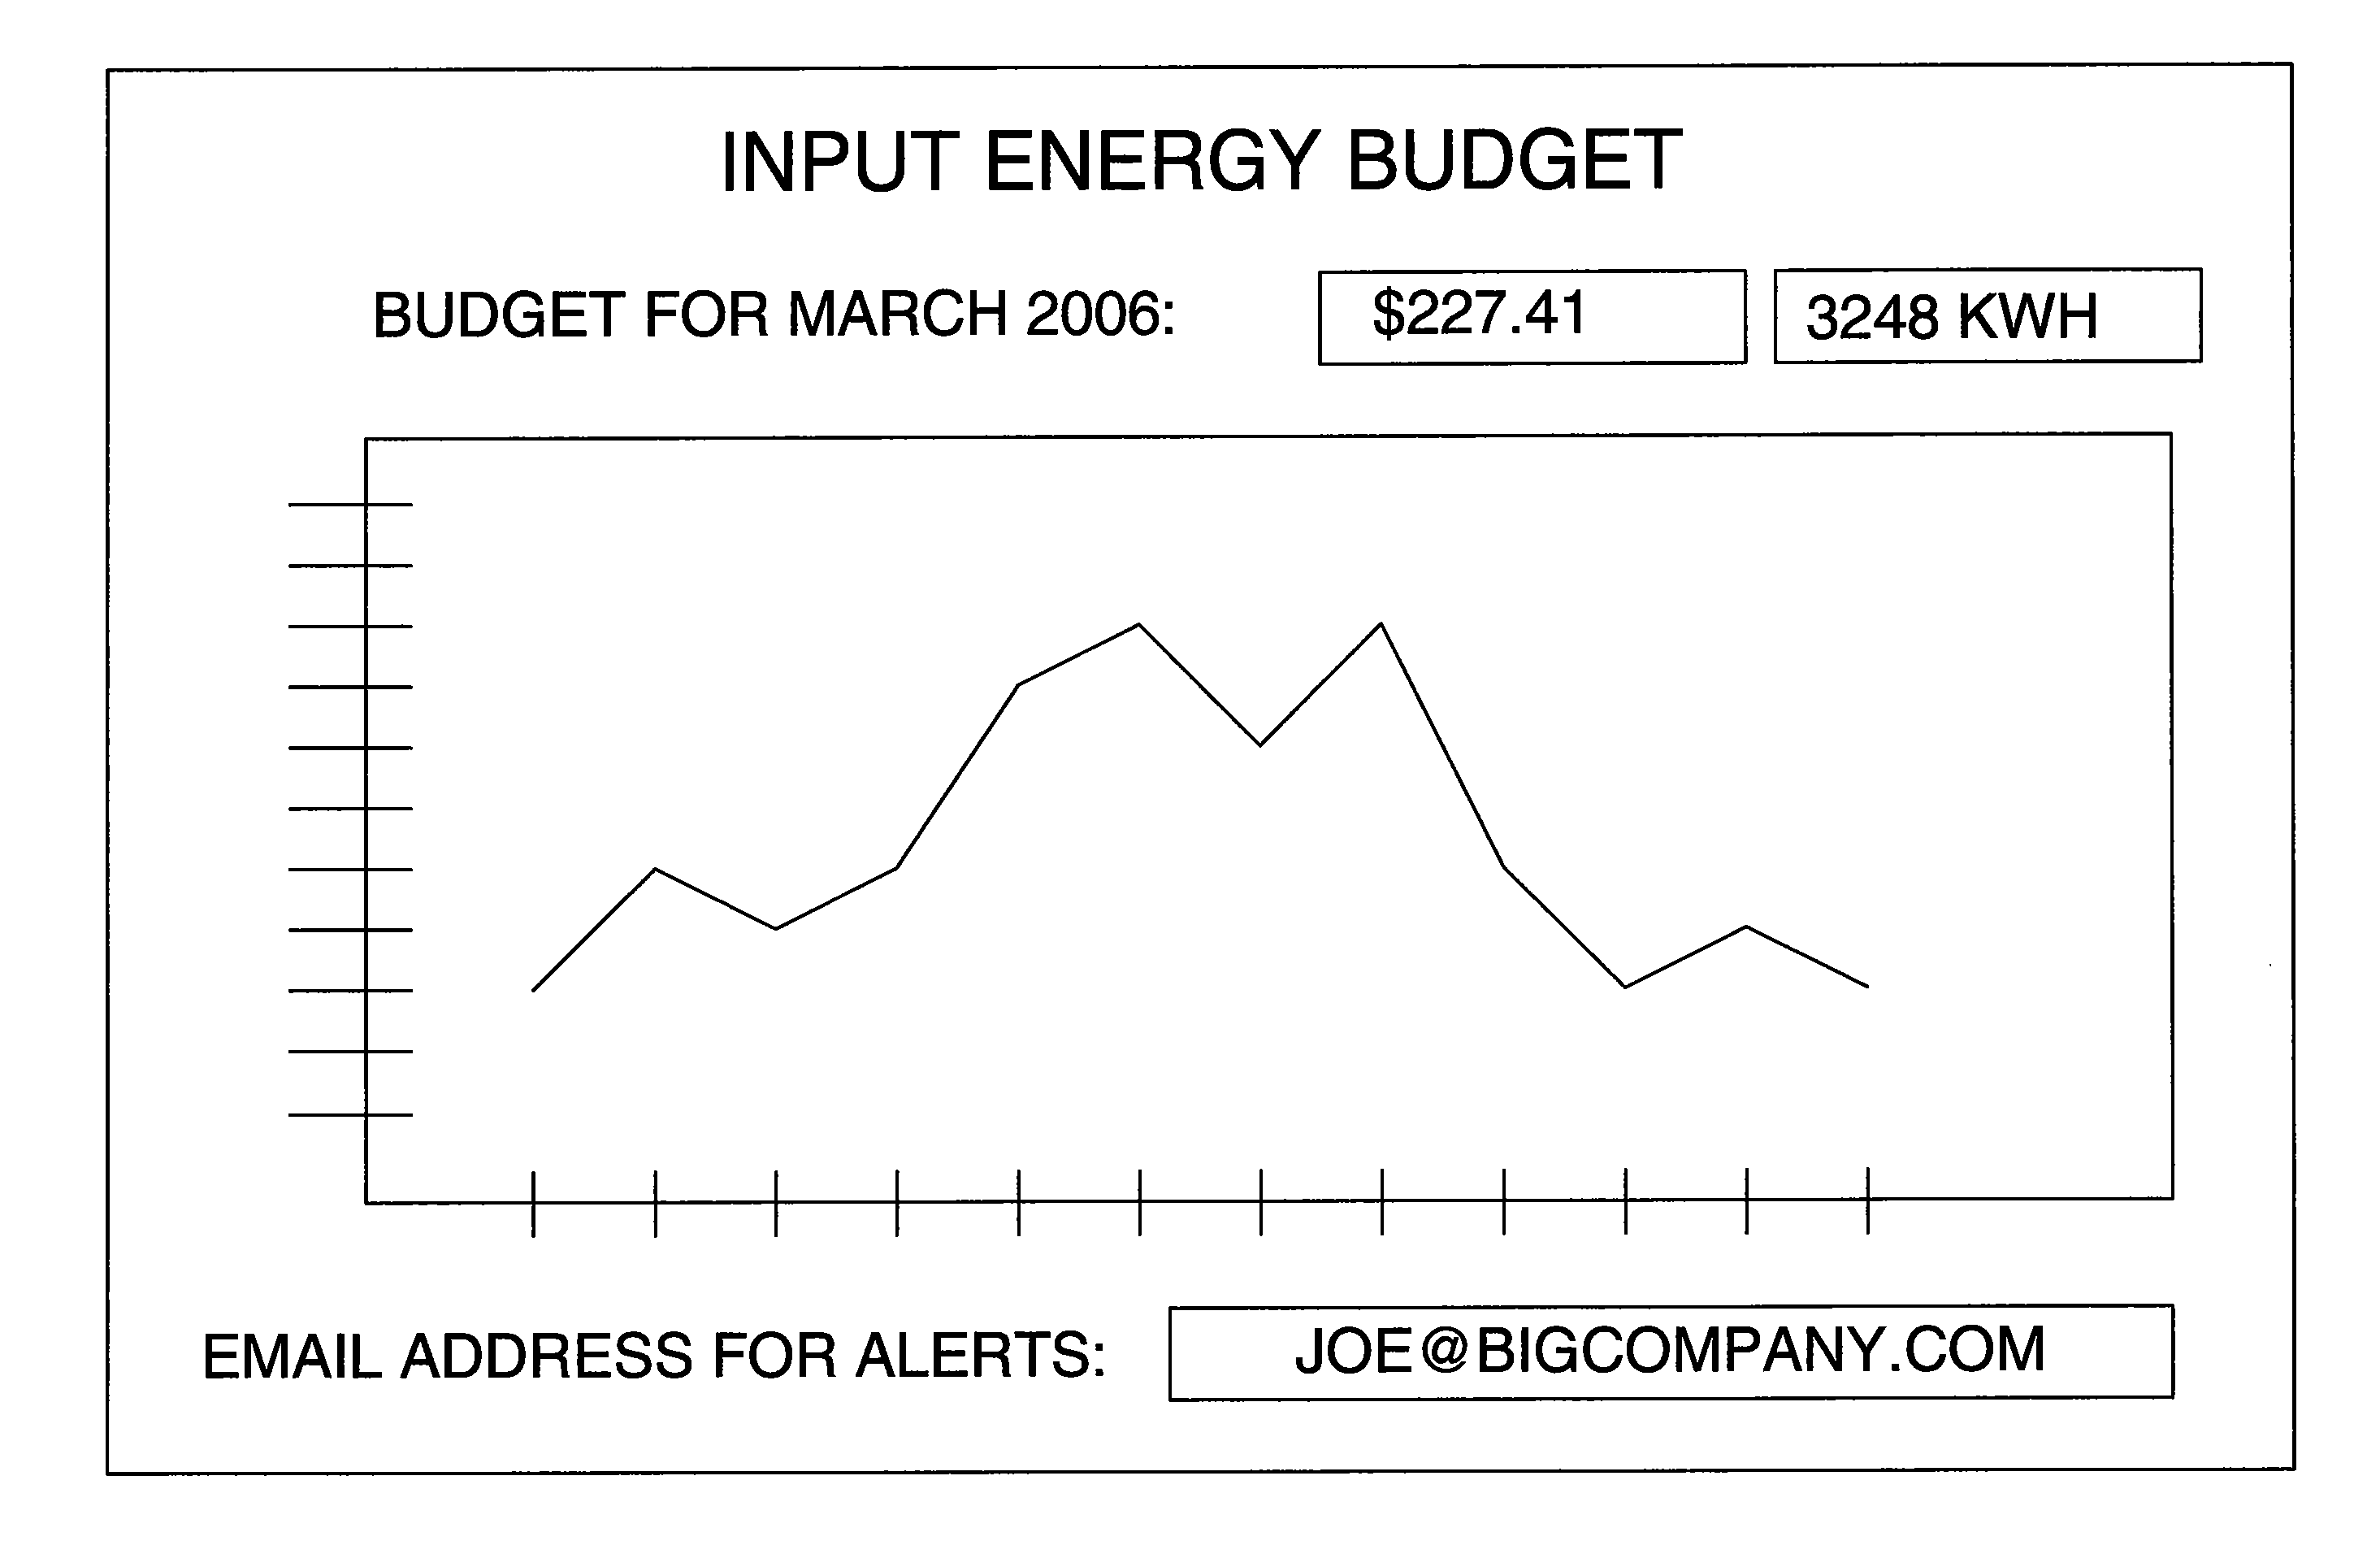 Energy budget manager